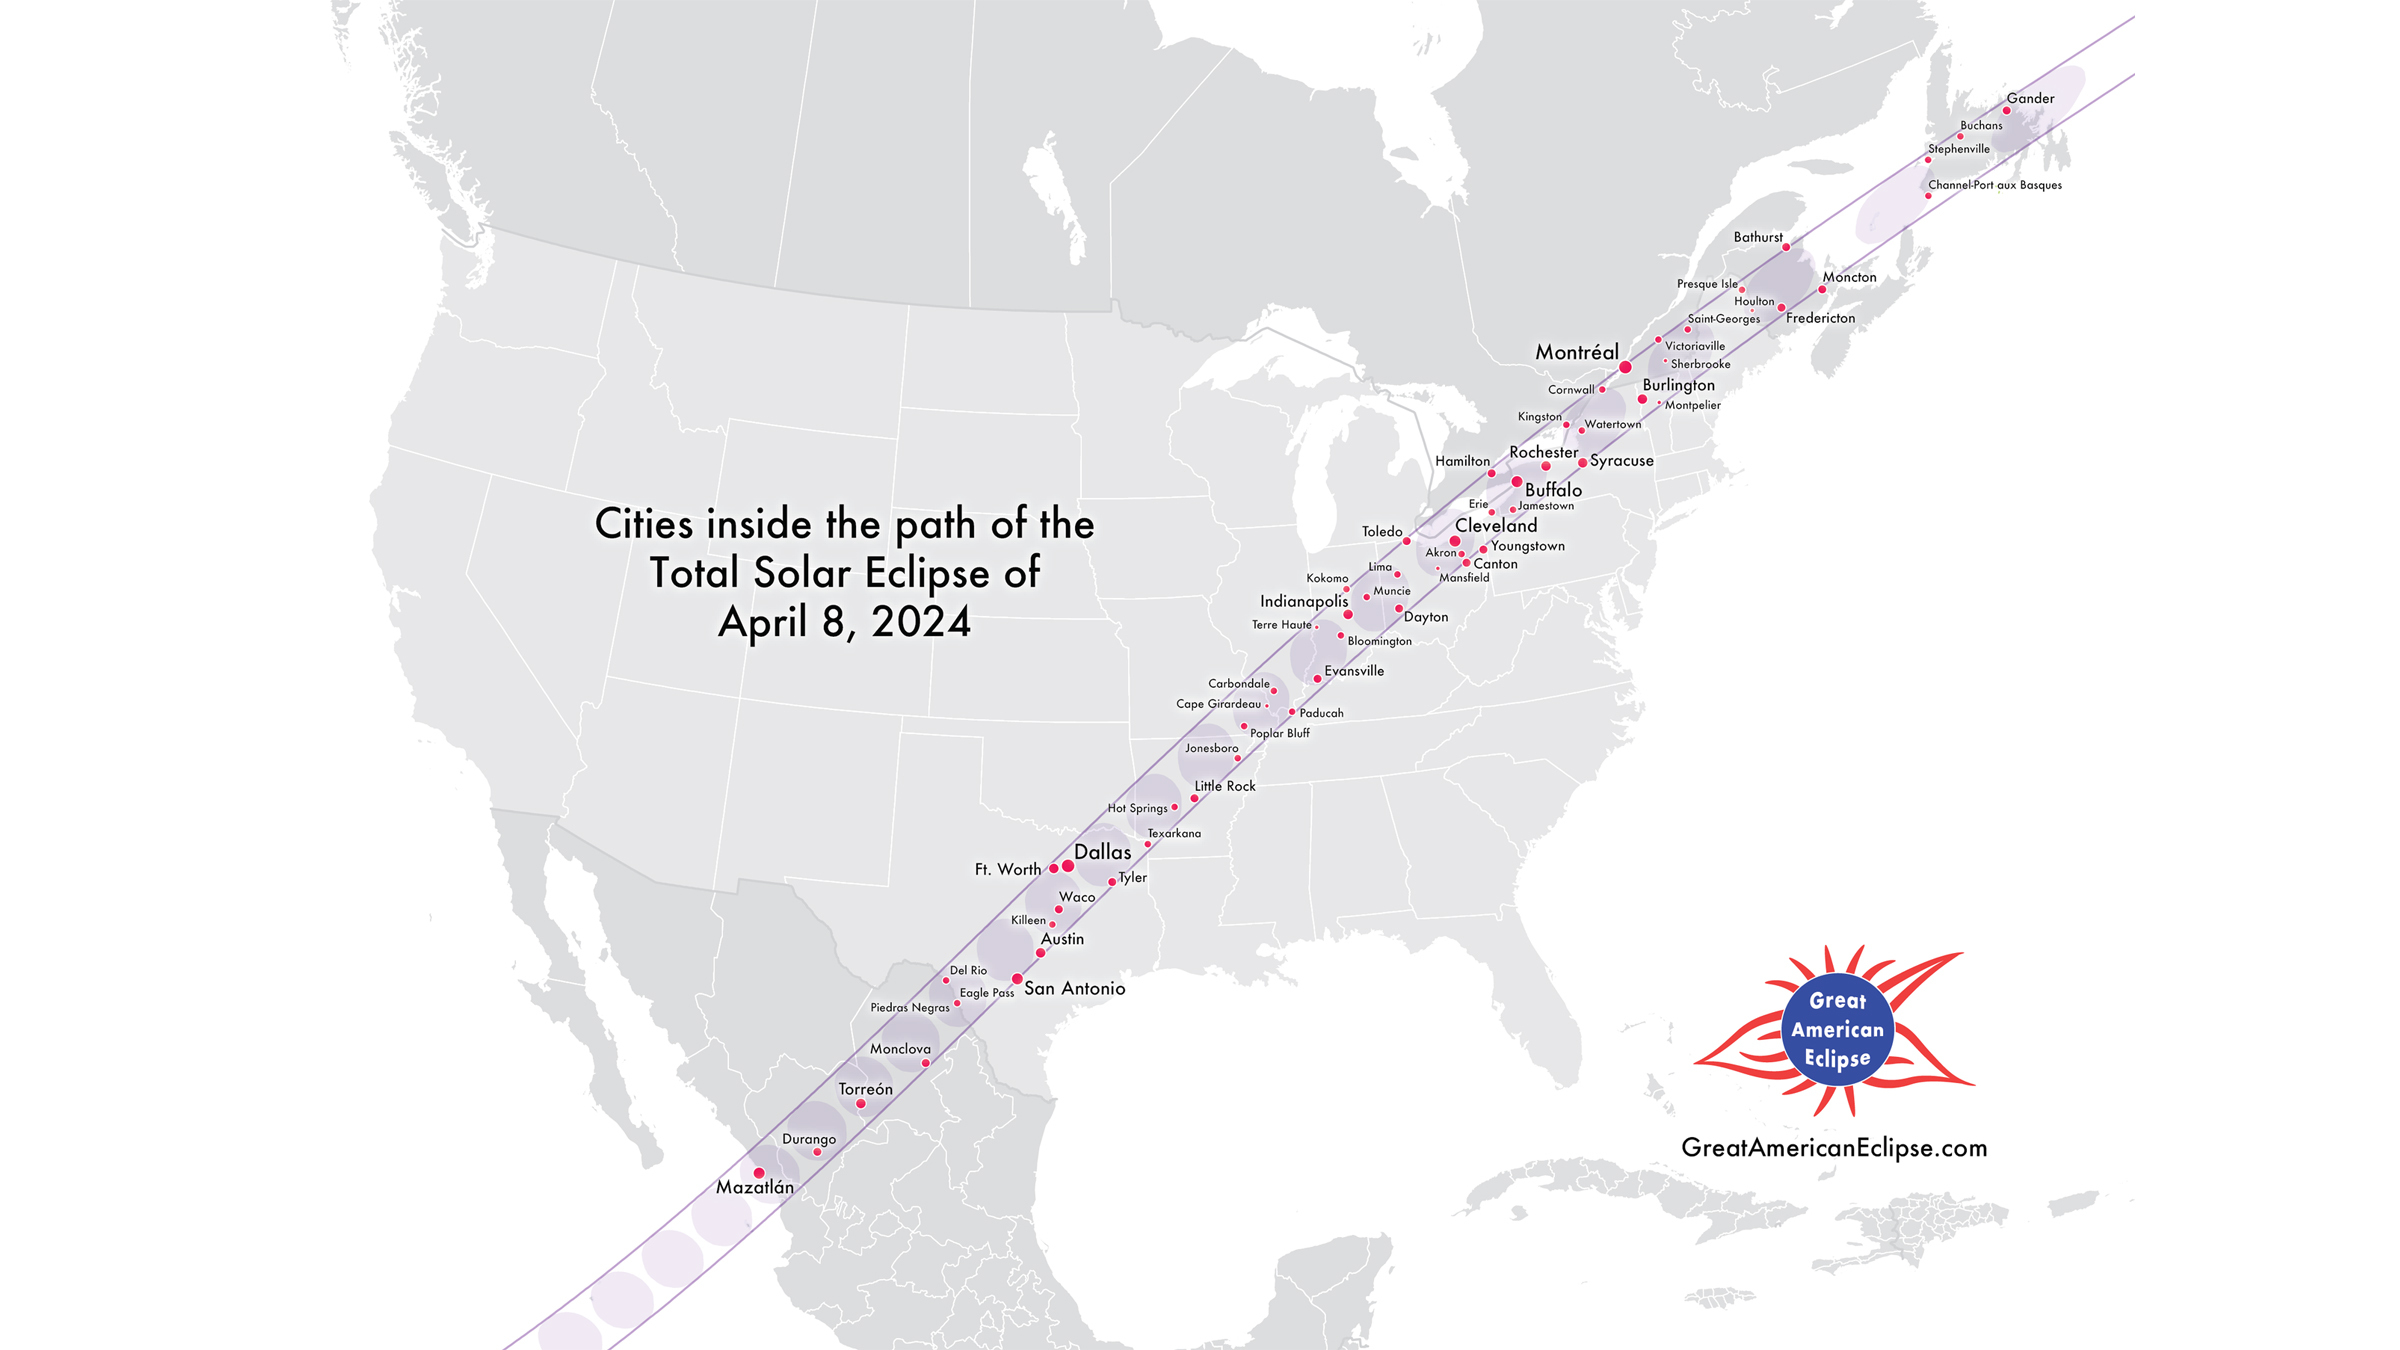 This map shows the major cities that will experience the total solar eclipse's path of totality.